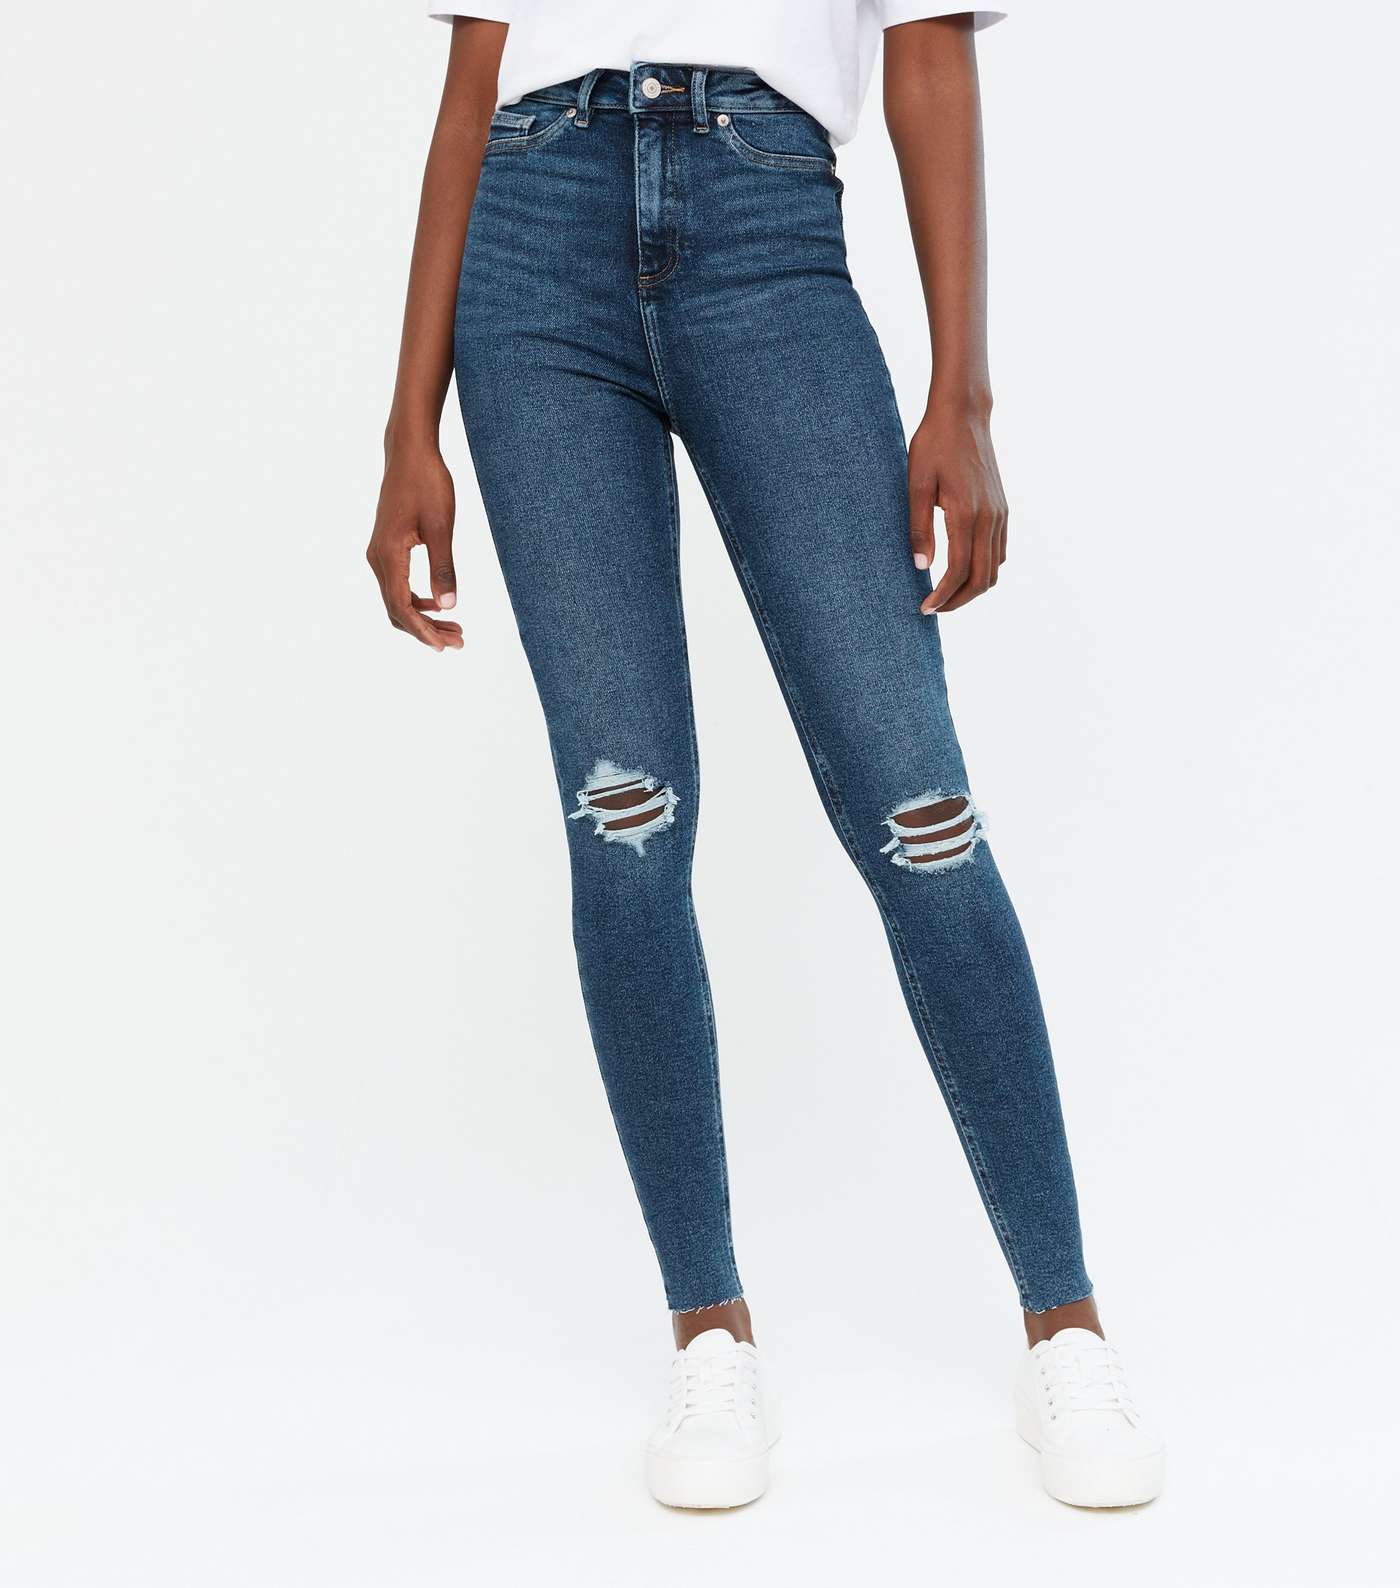 Tall Blue Rinse Wash Ripped High Waist Hallie Super Skinny Jeans Image 2